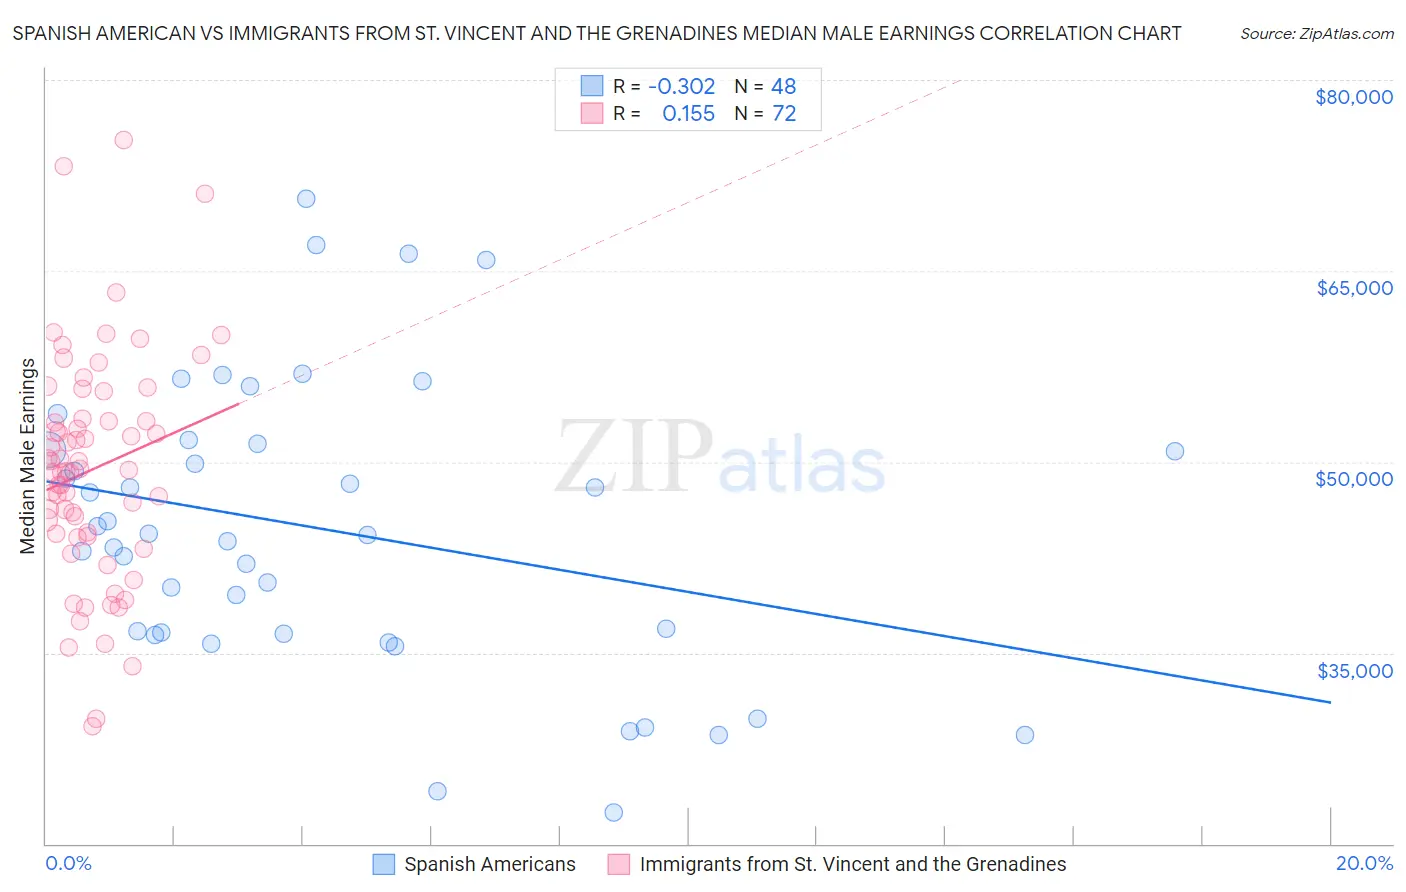 Spanish American vs Immigrants from St. Vincent and the Grenadines Median Male Earnings